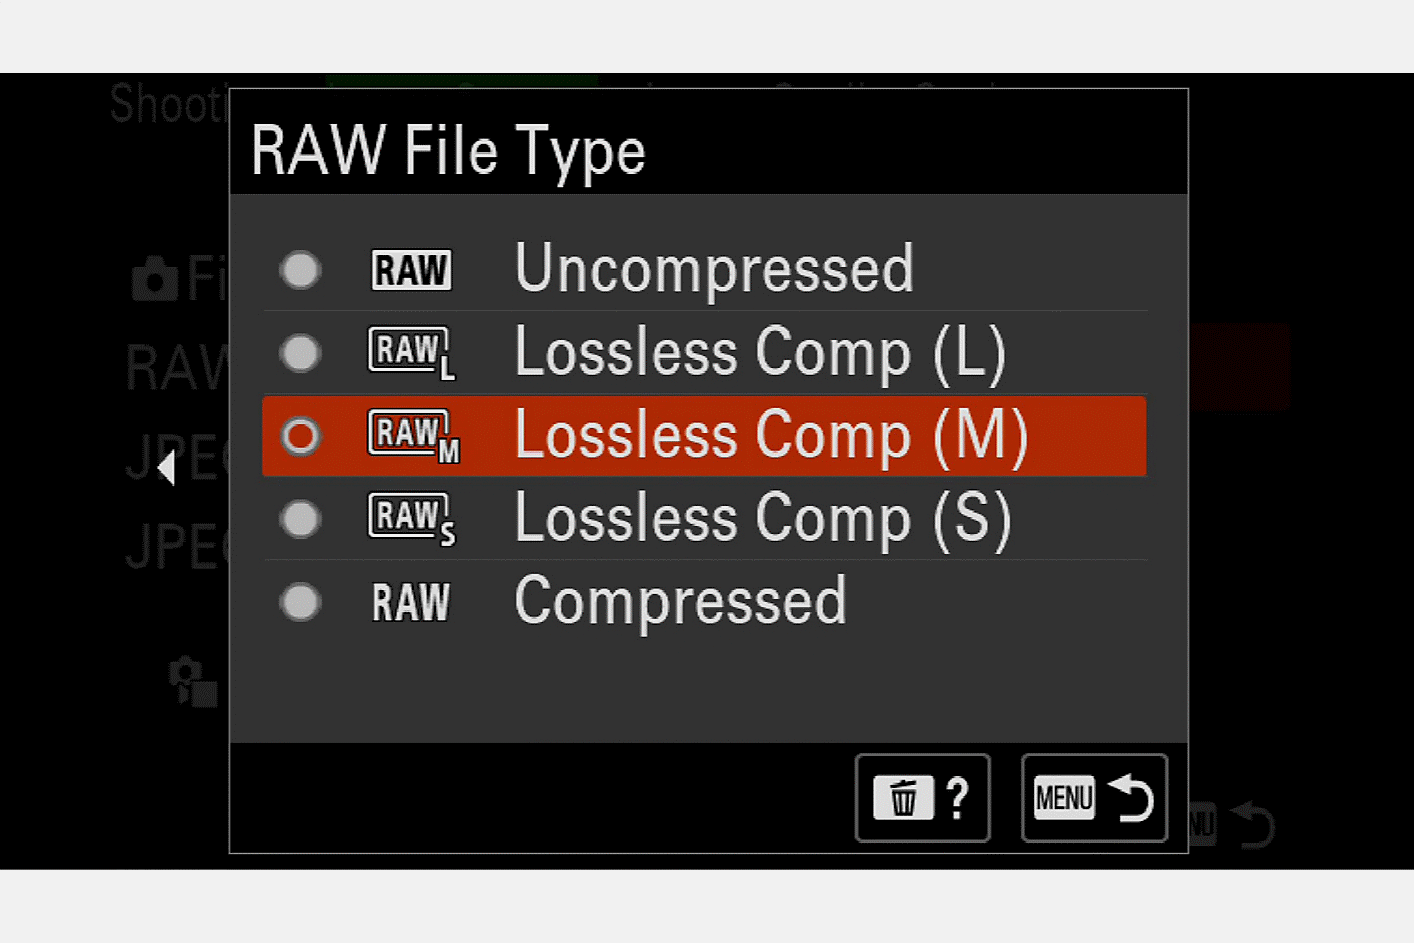 Image of the camera display for selection of RAW file type